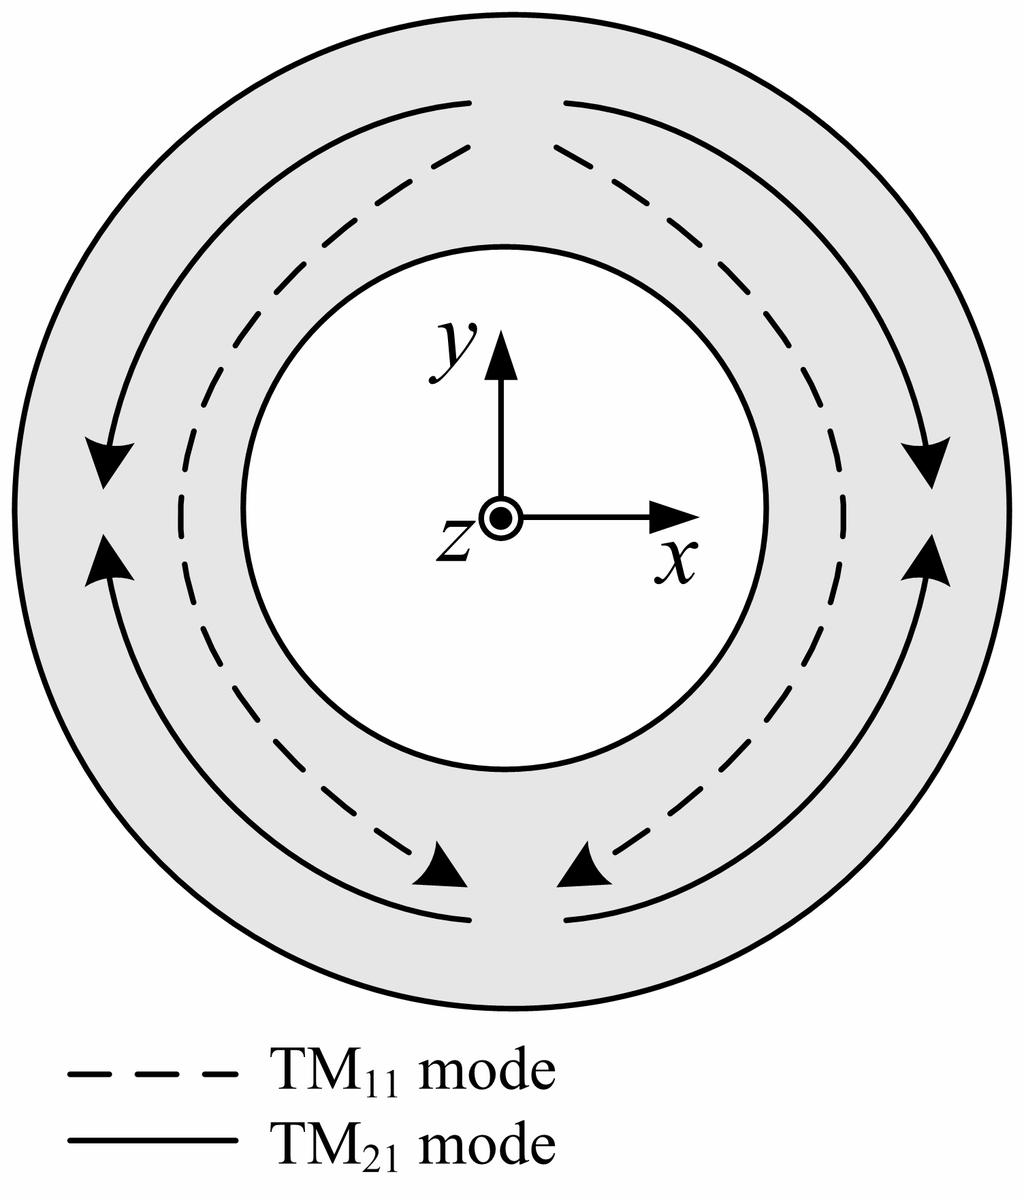 150 Chen et al. (a) (b) Figure 2. Current distribution on annular ring. (a) Sketch map of surface current. (b) Simulated current of TM 21 mode. Figure 3.